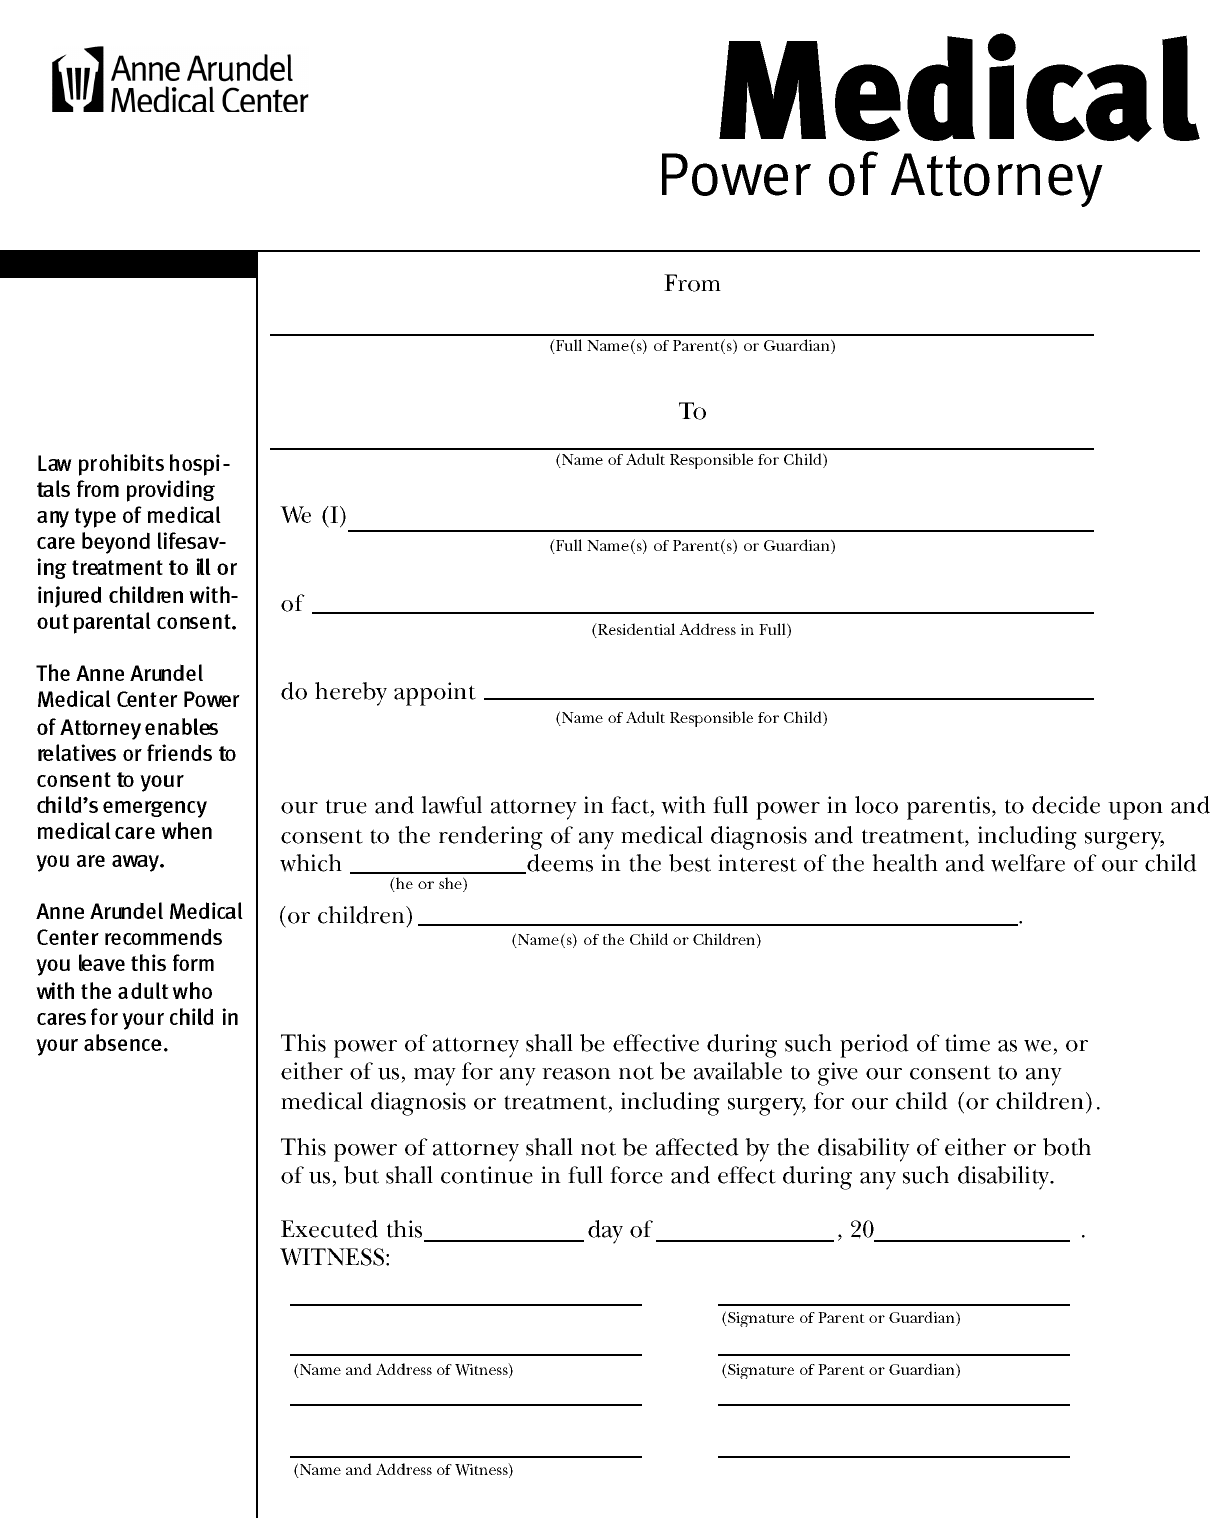 Maryland Medical Power of Attorney Form